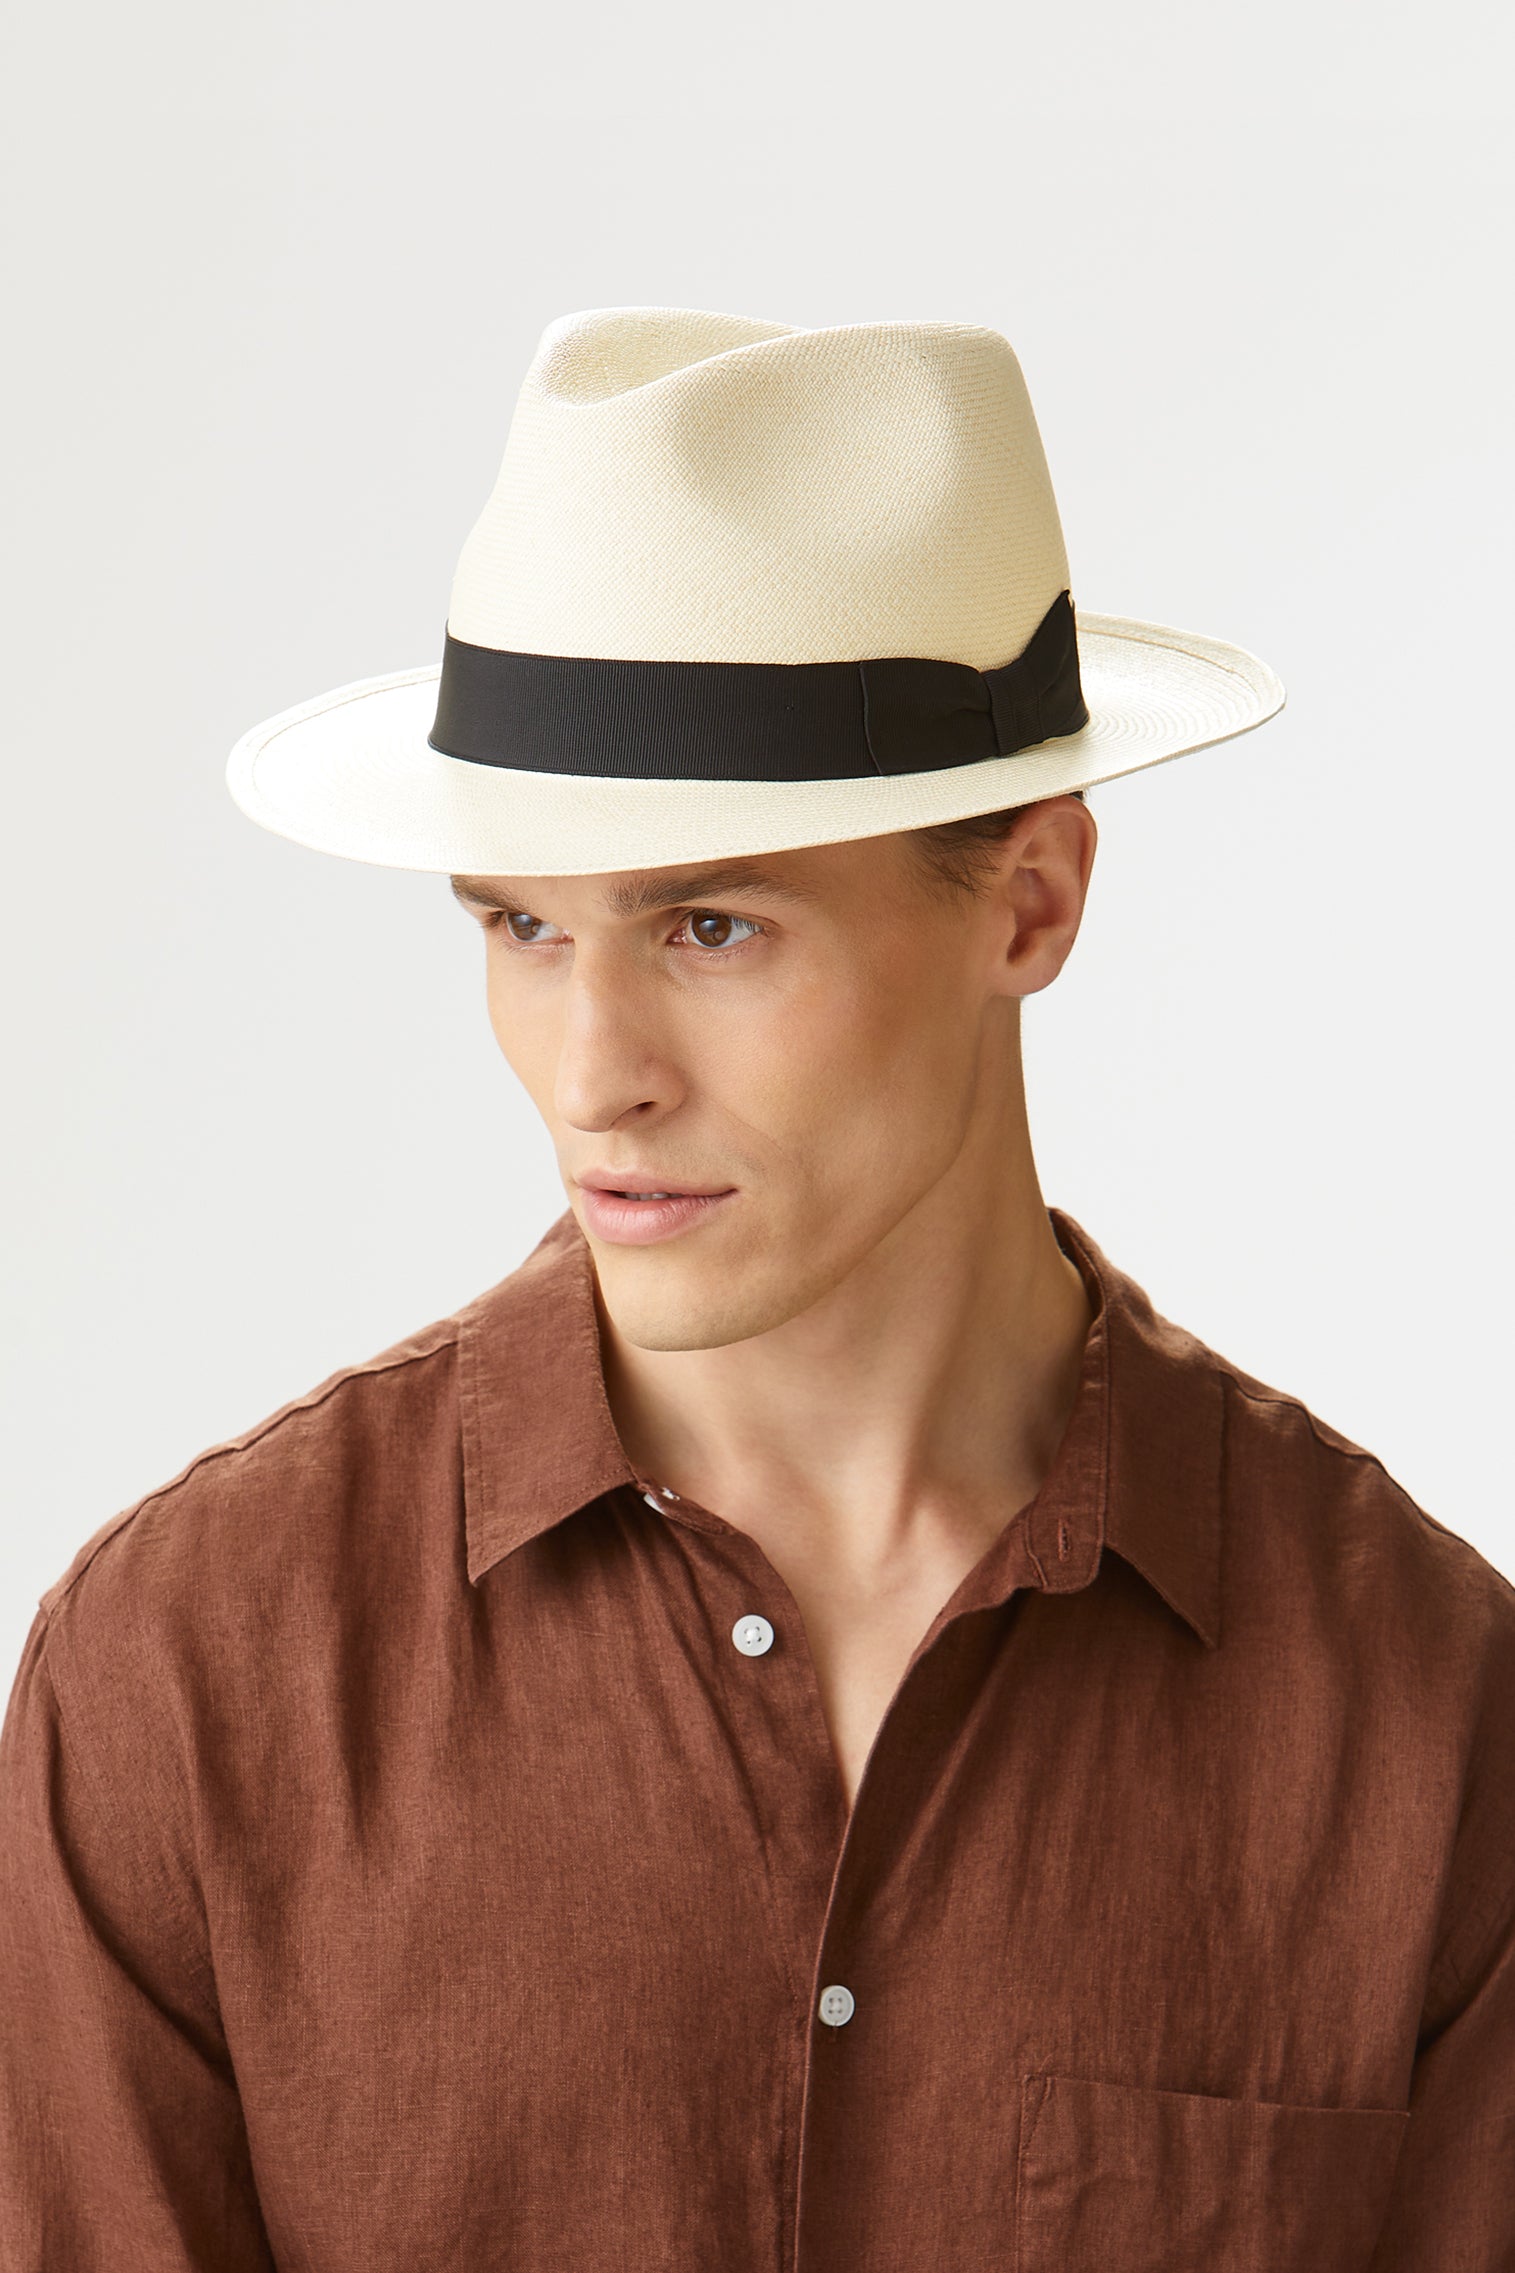 Classic Panama - Hats for Tall People - Lock & Co. Hatters London UK